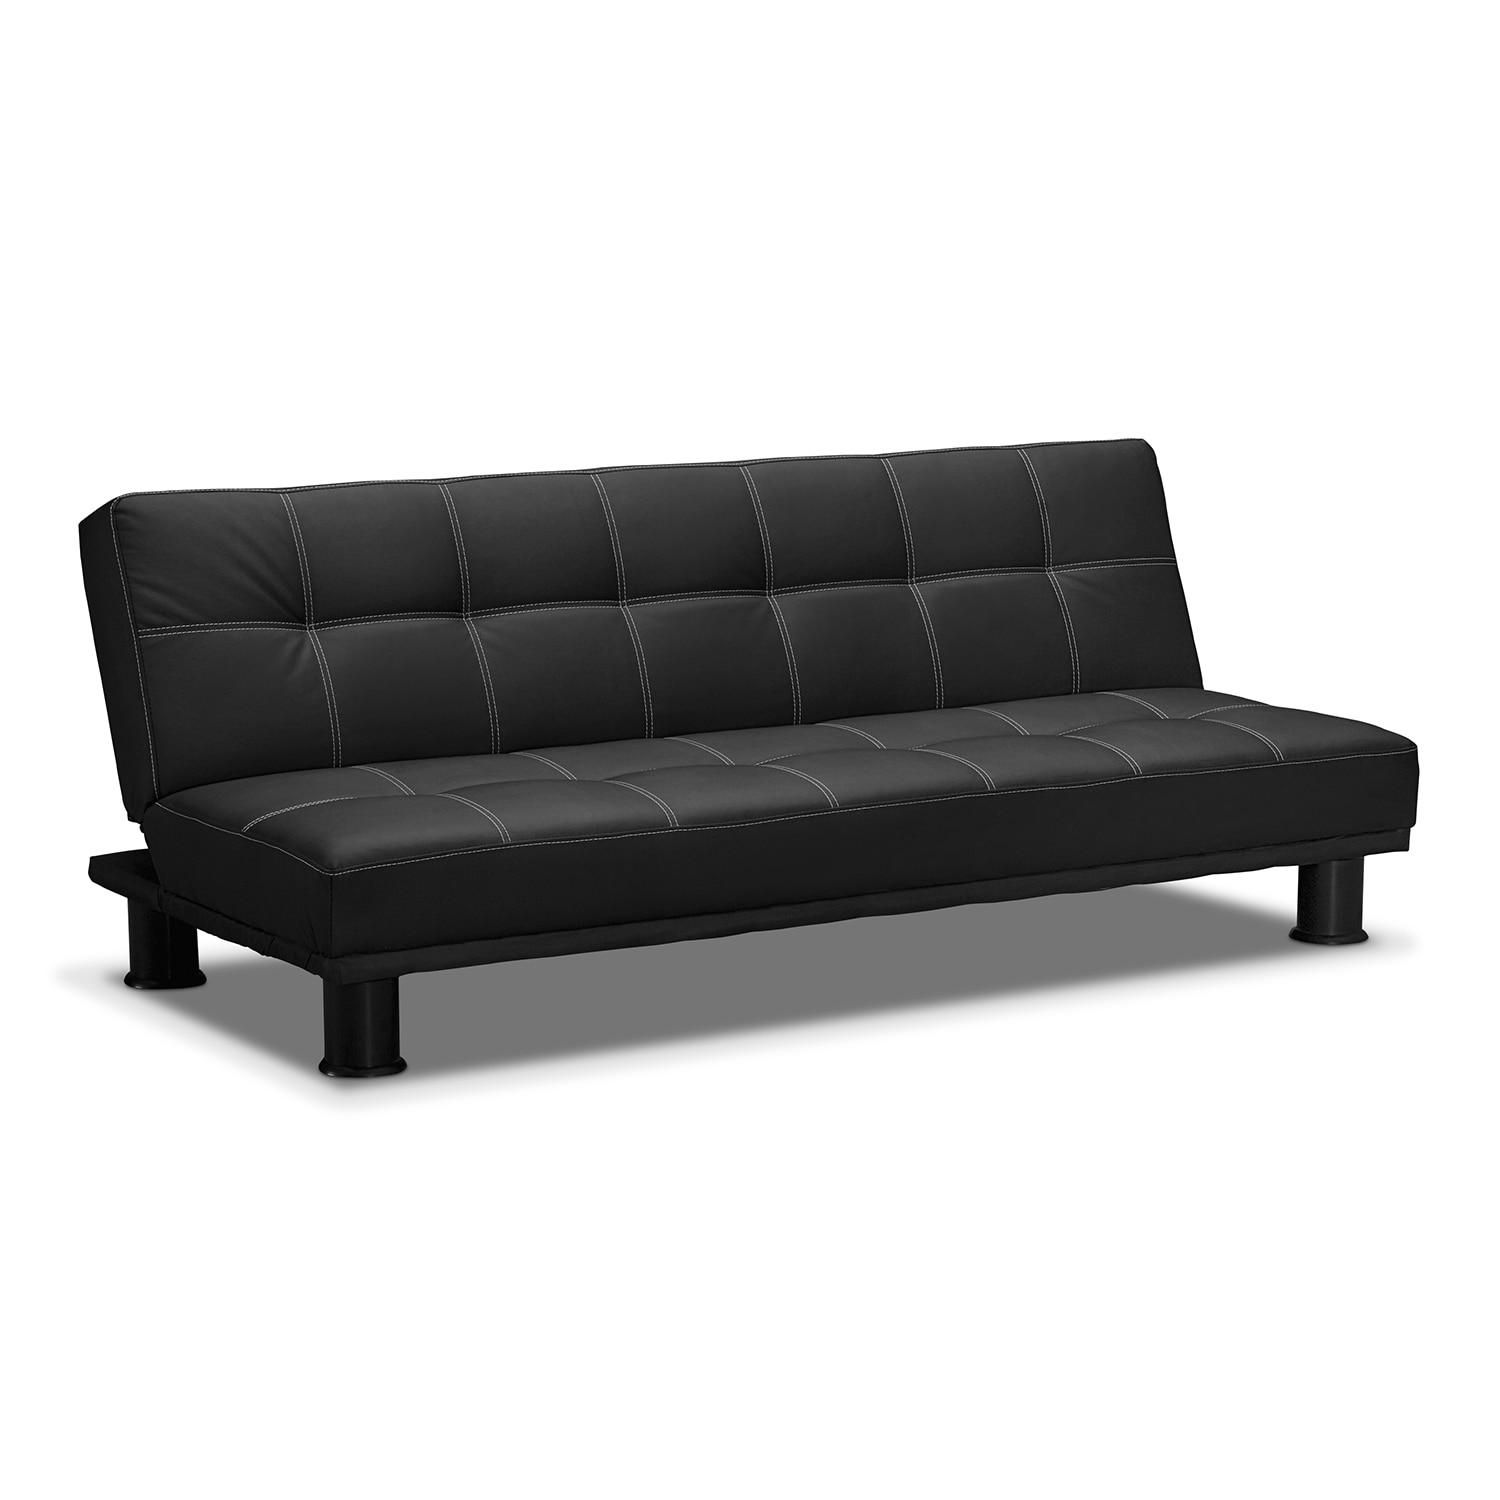 Phyllo Futon Sofa Bed – Black | Value City Furniture Pertaining To Small Black Futon Sofa Beds (View 1 of 20)